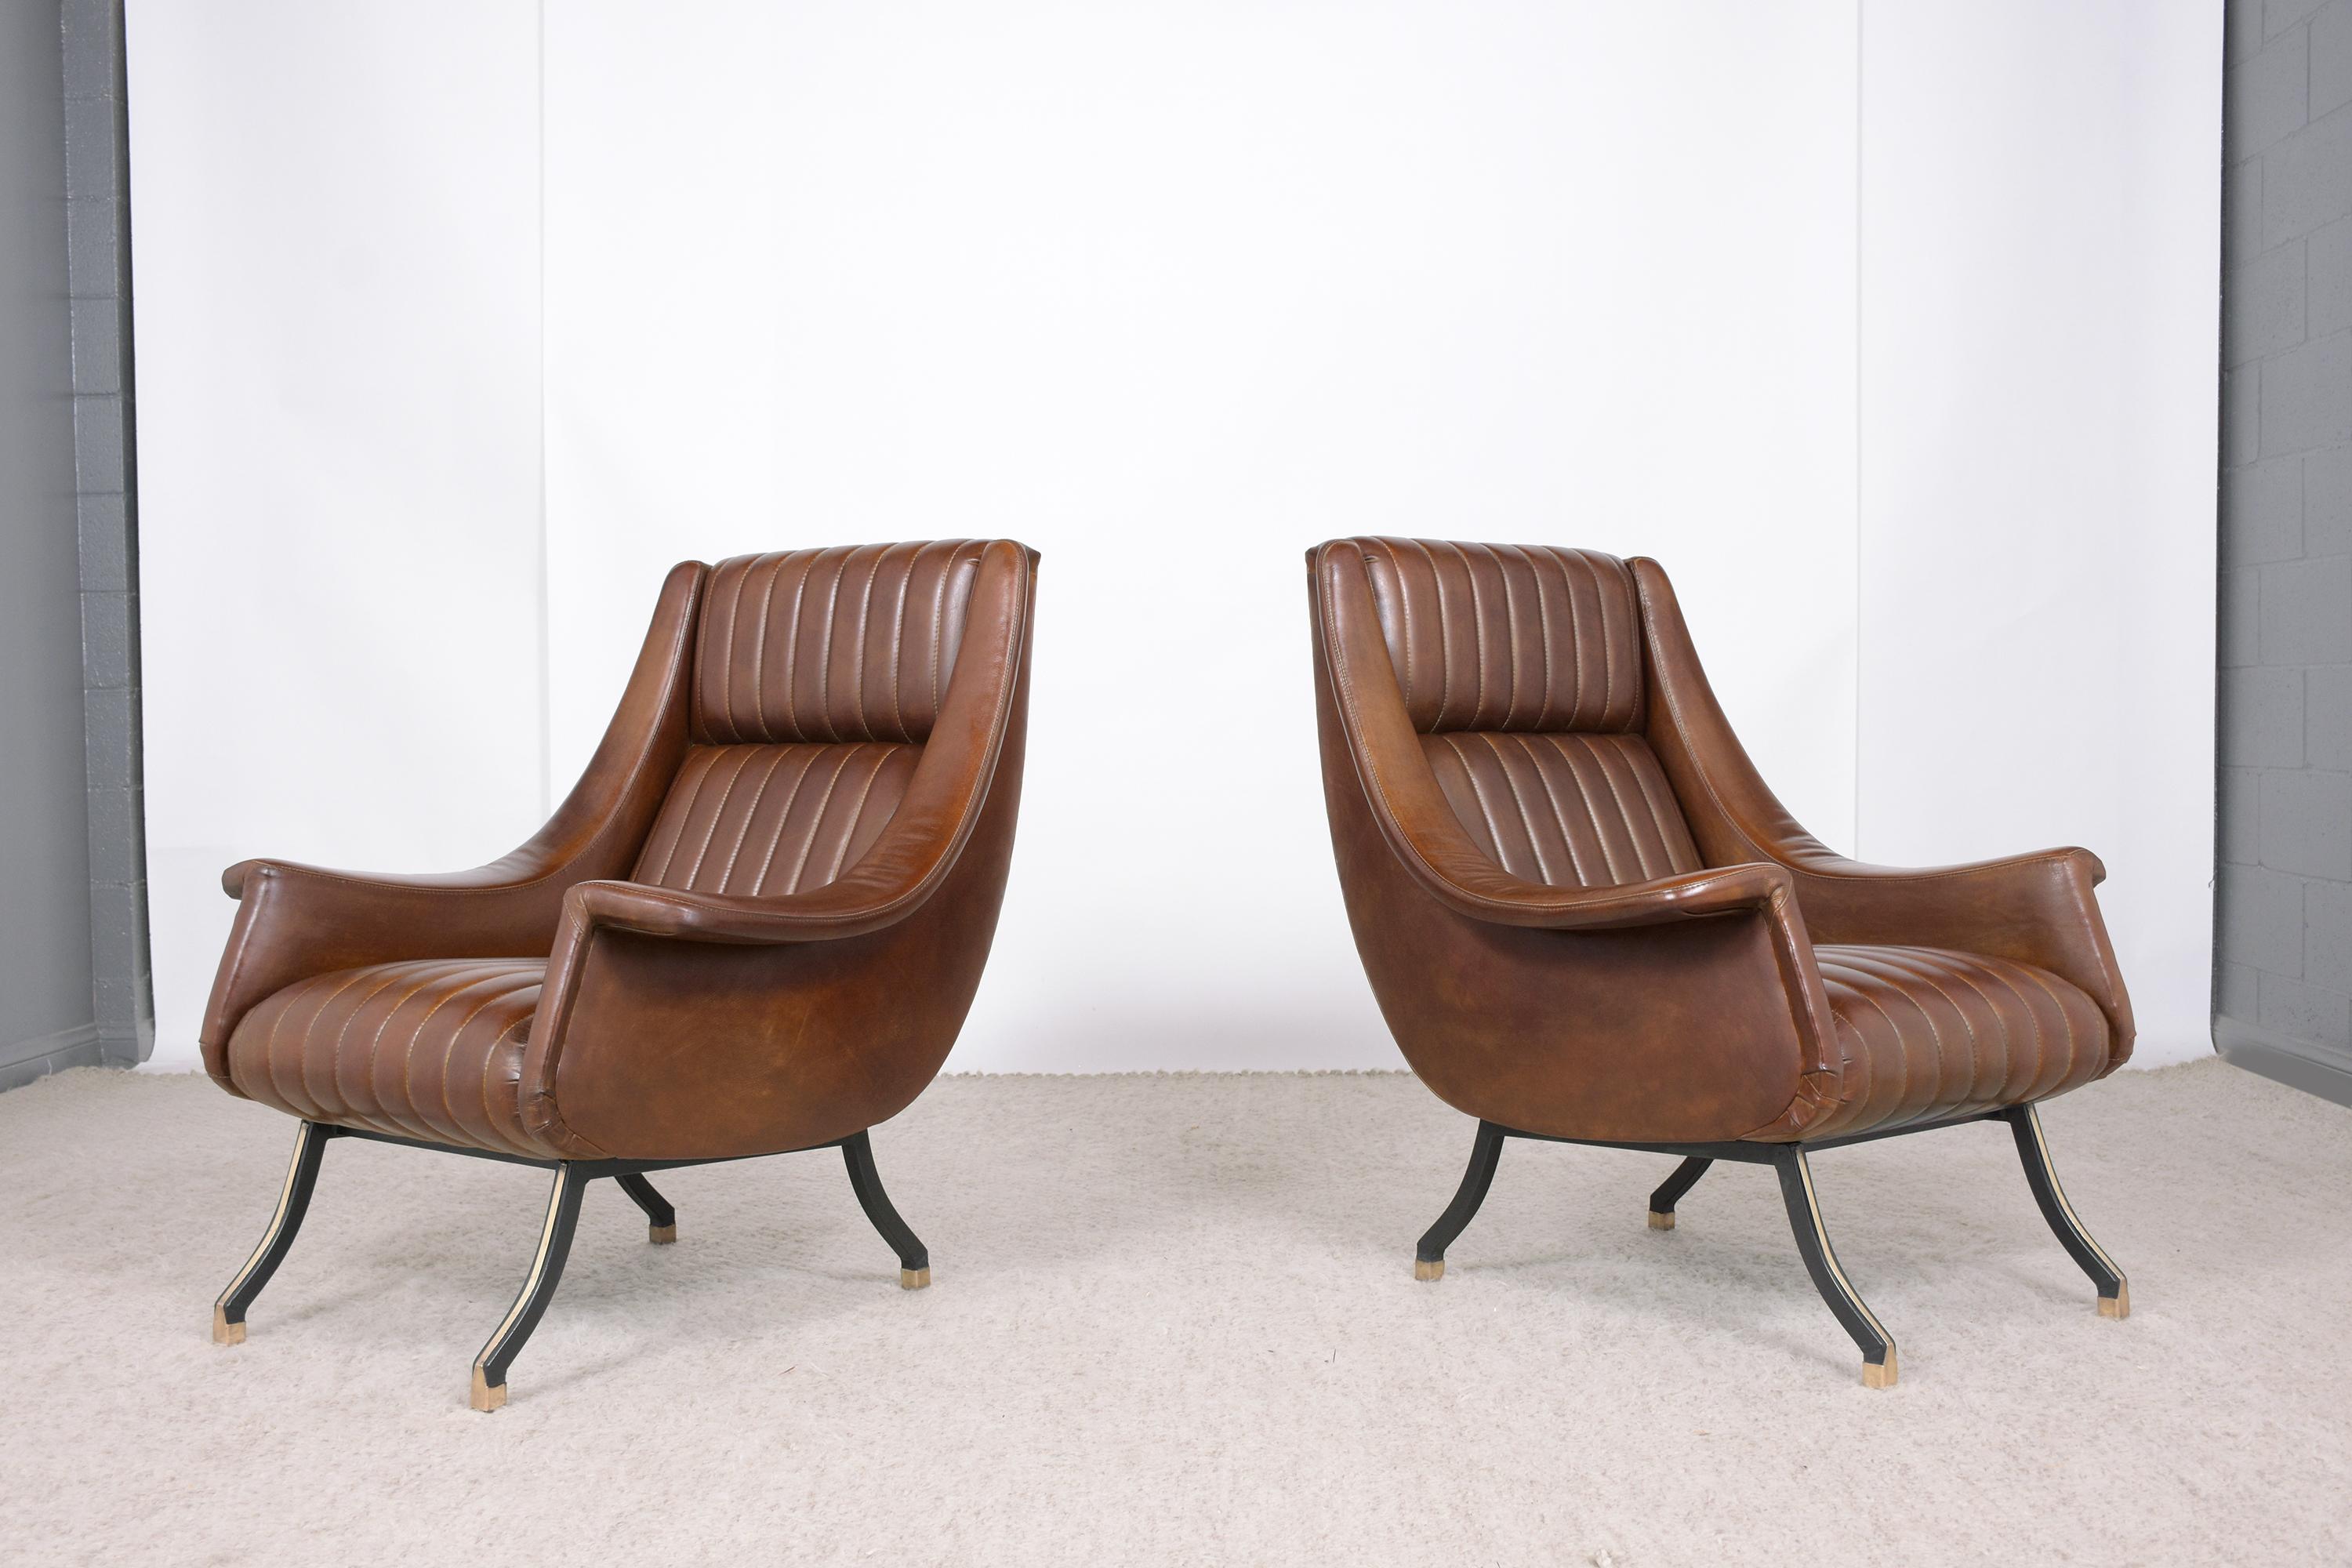 Pair of Vintage Mid-Century Modern Leather Lounge Chairs 1